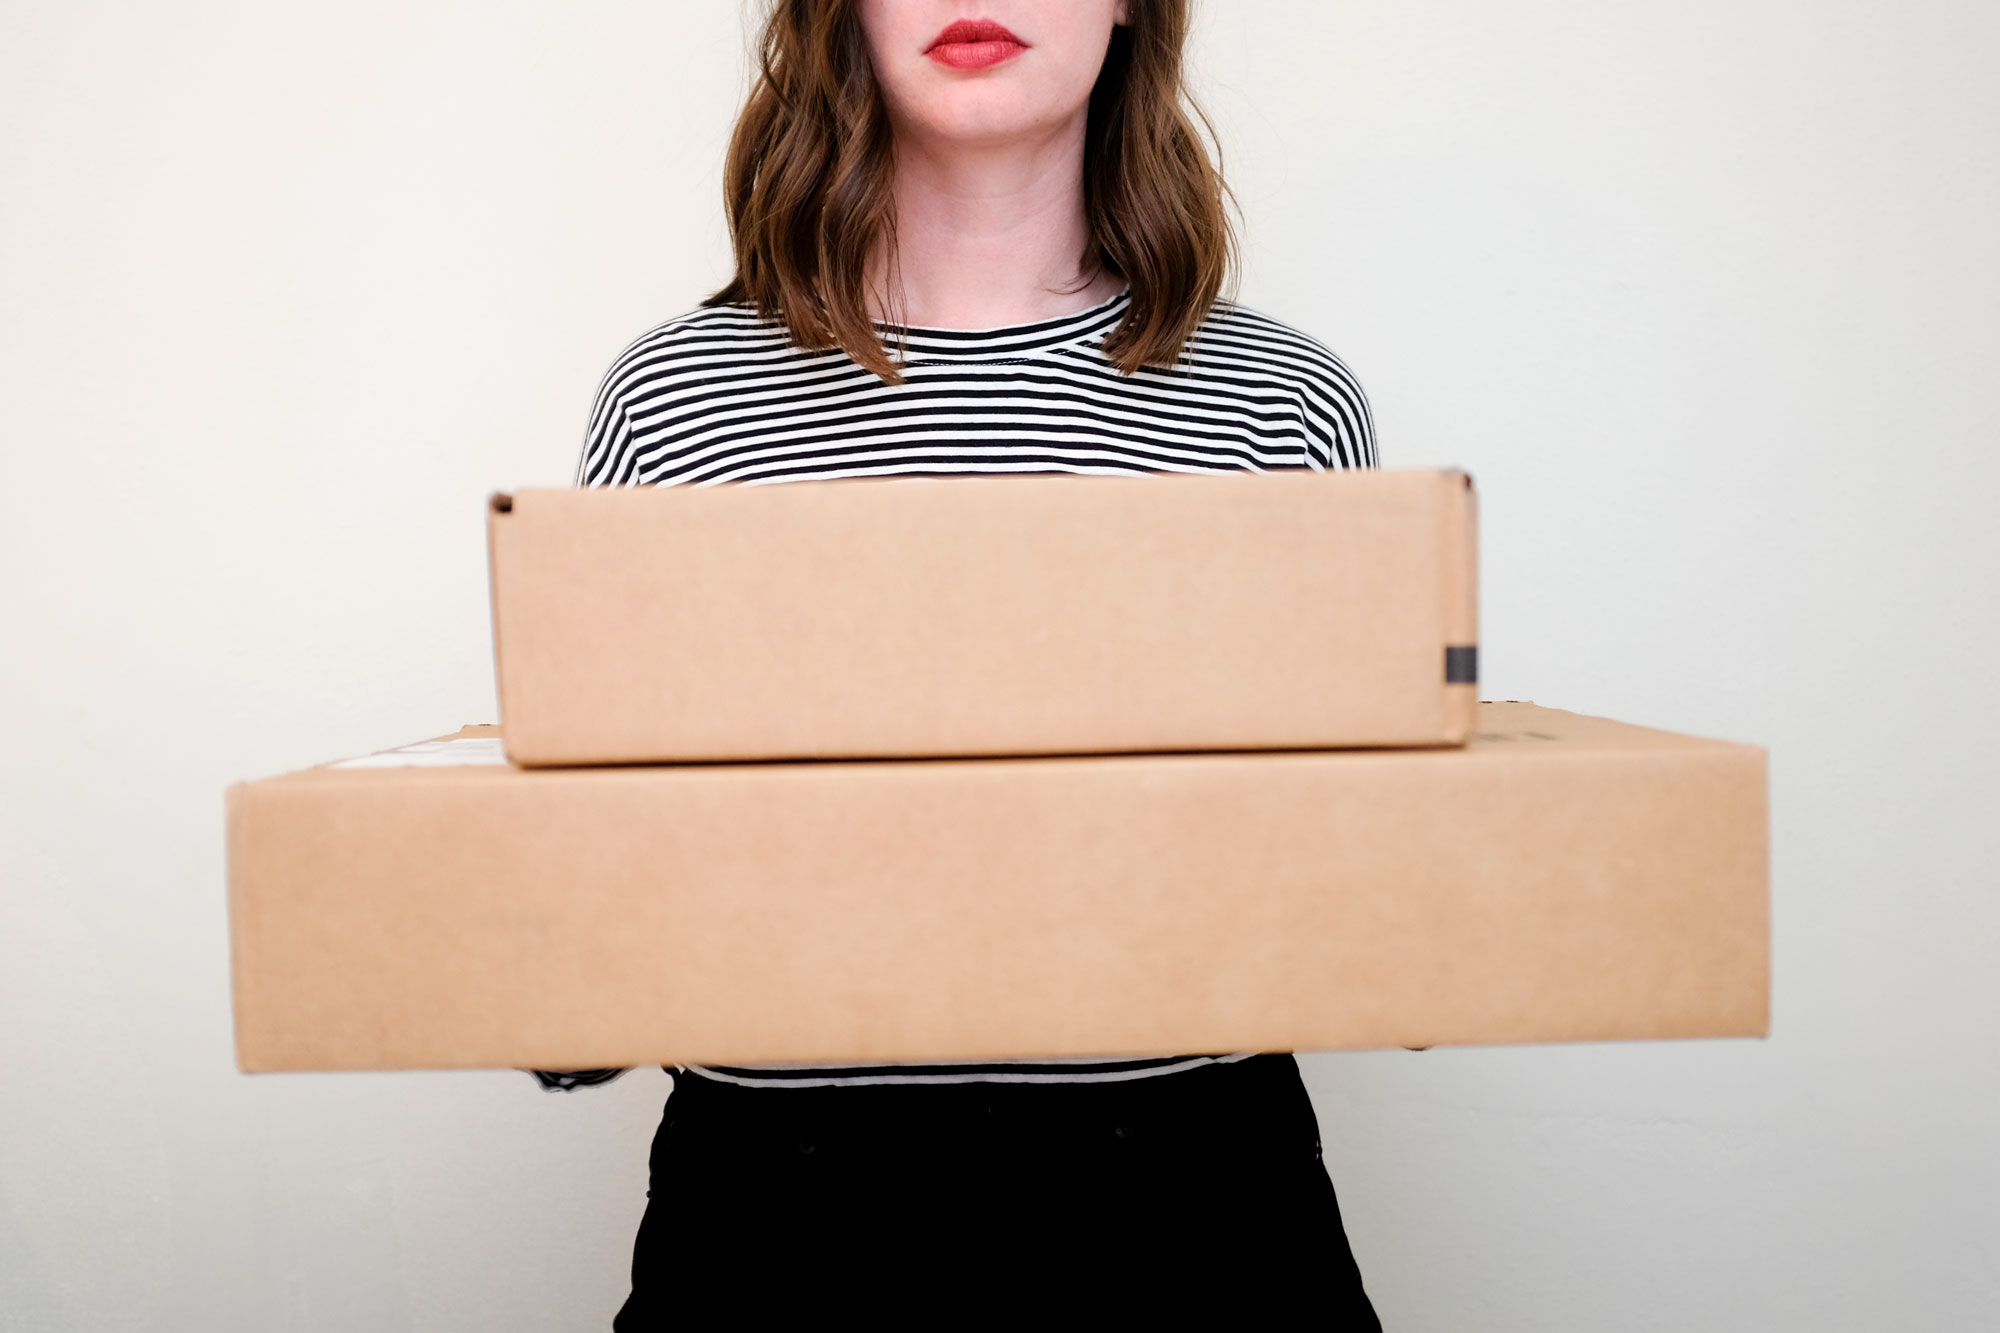 Alyssa wears a stripe tee and holds two mailer boxes